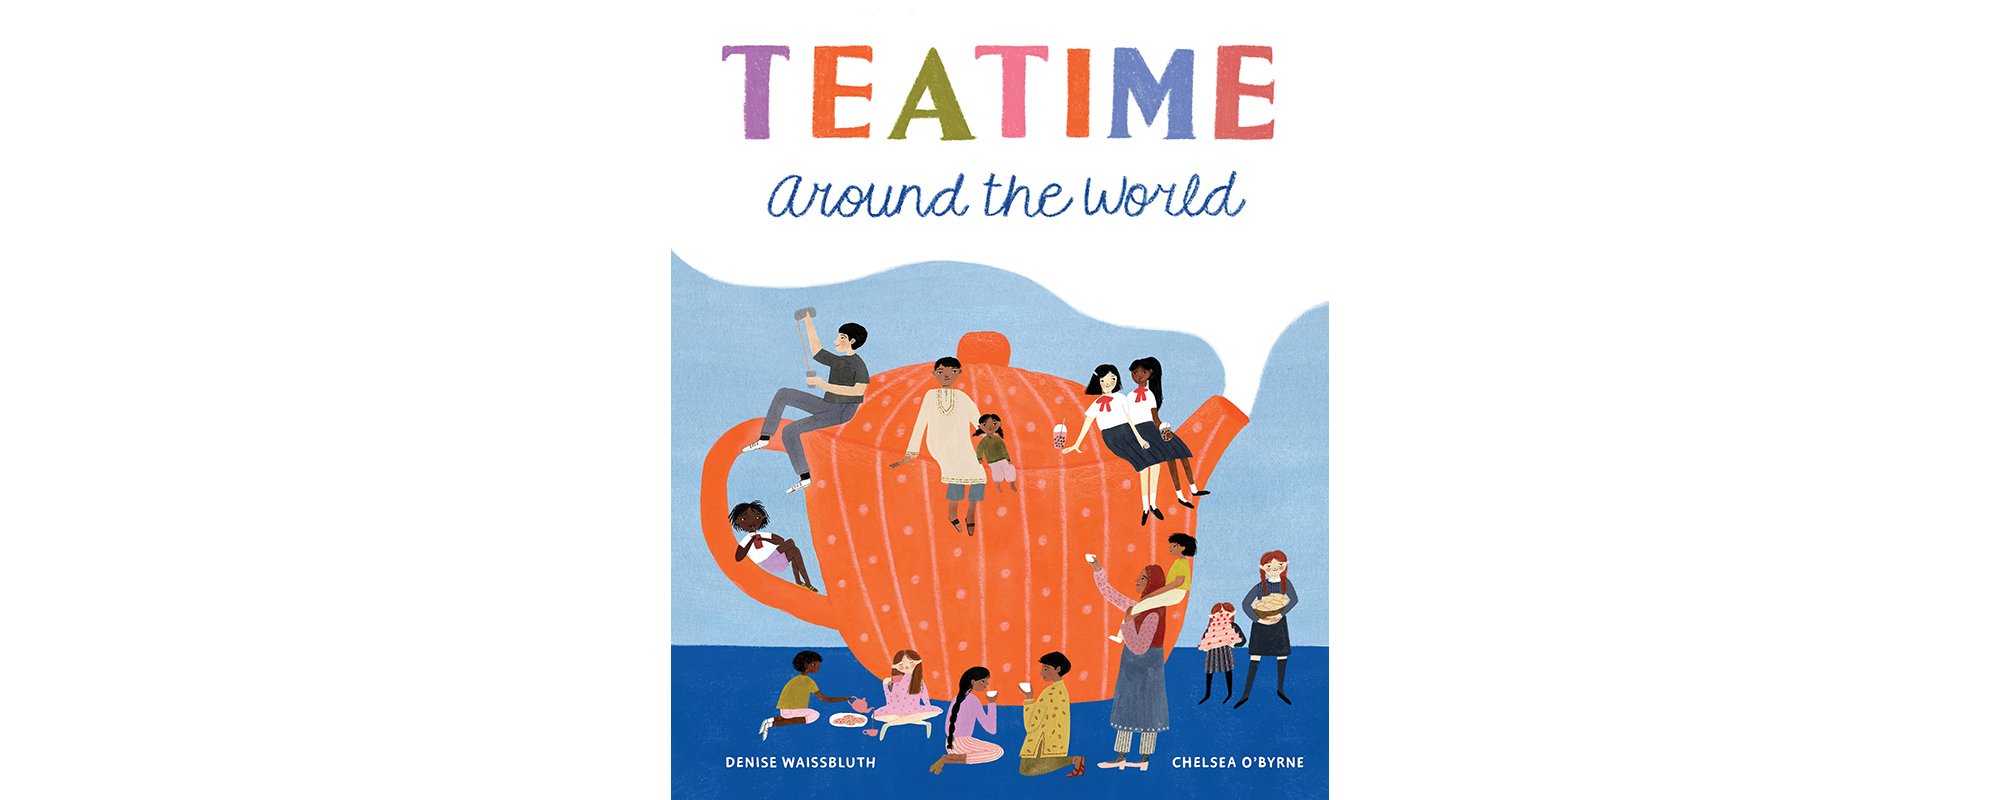 Teatime Around the World | Quill and Quire